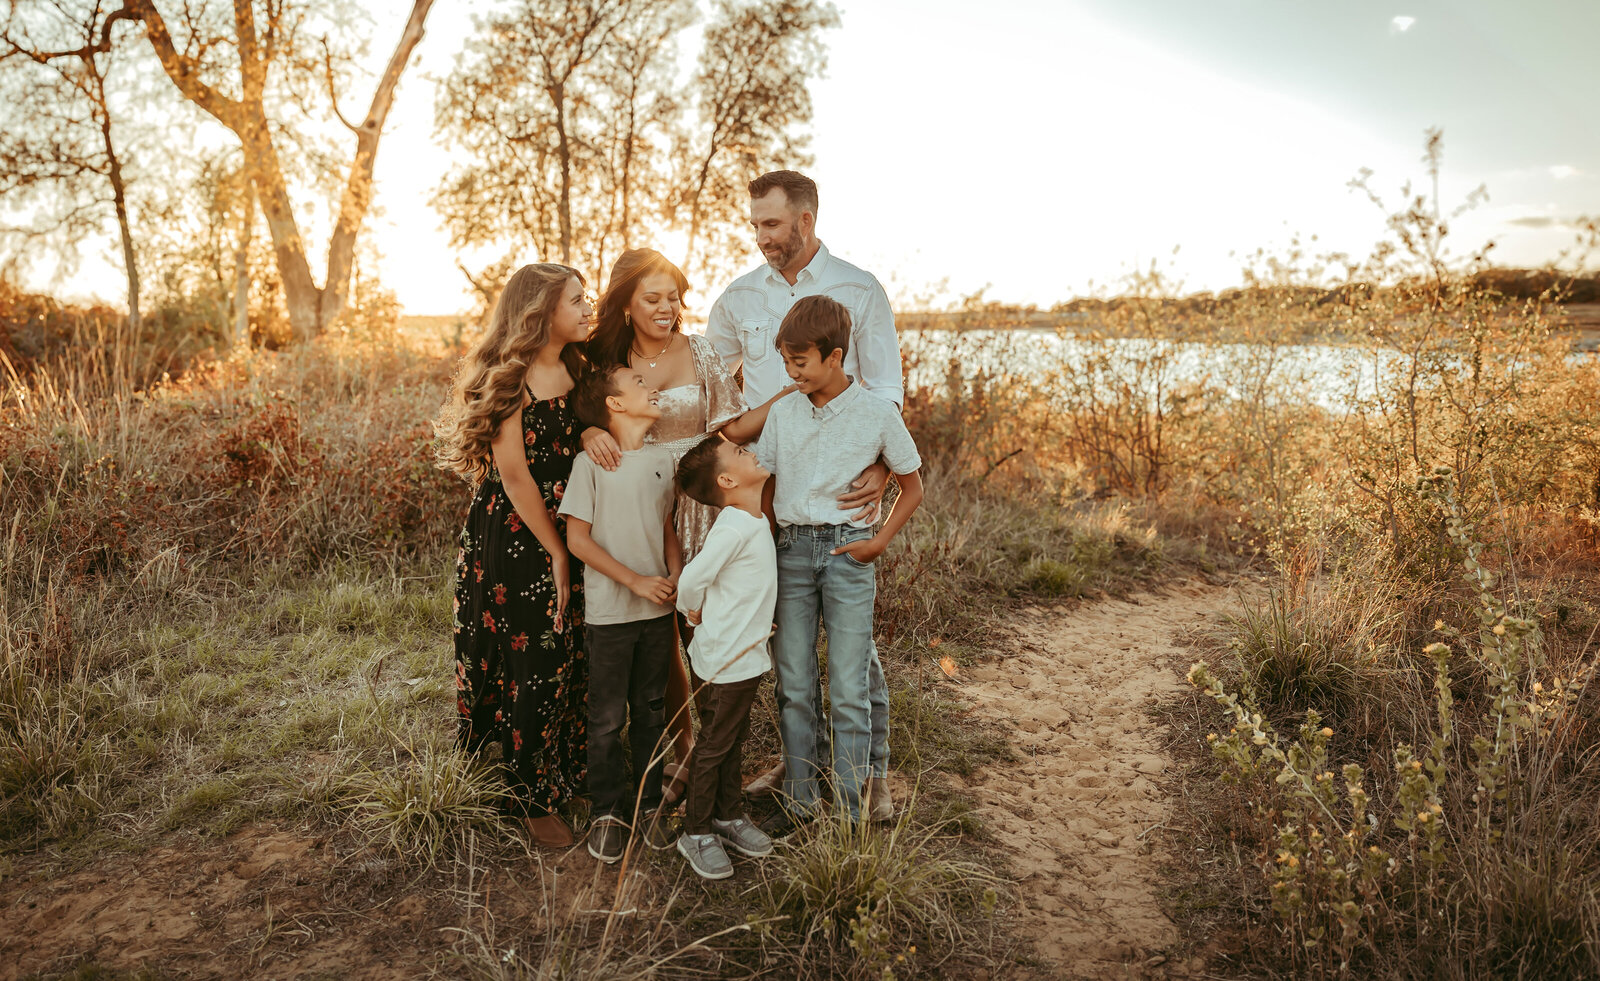 MOther and father gaze at their children in this beautiful family photography session in Dallas, TX